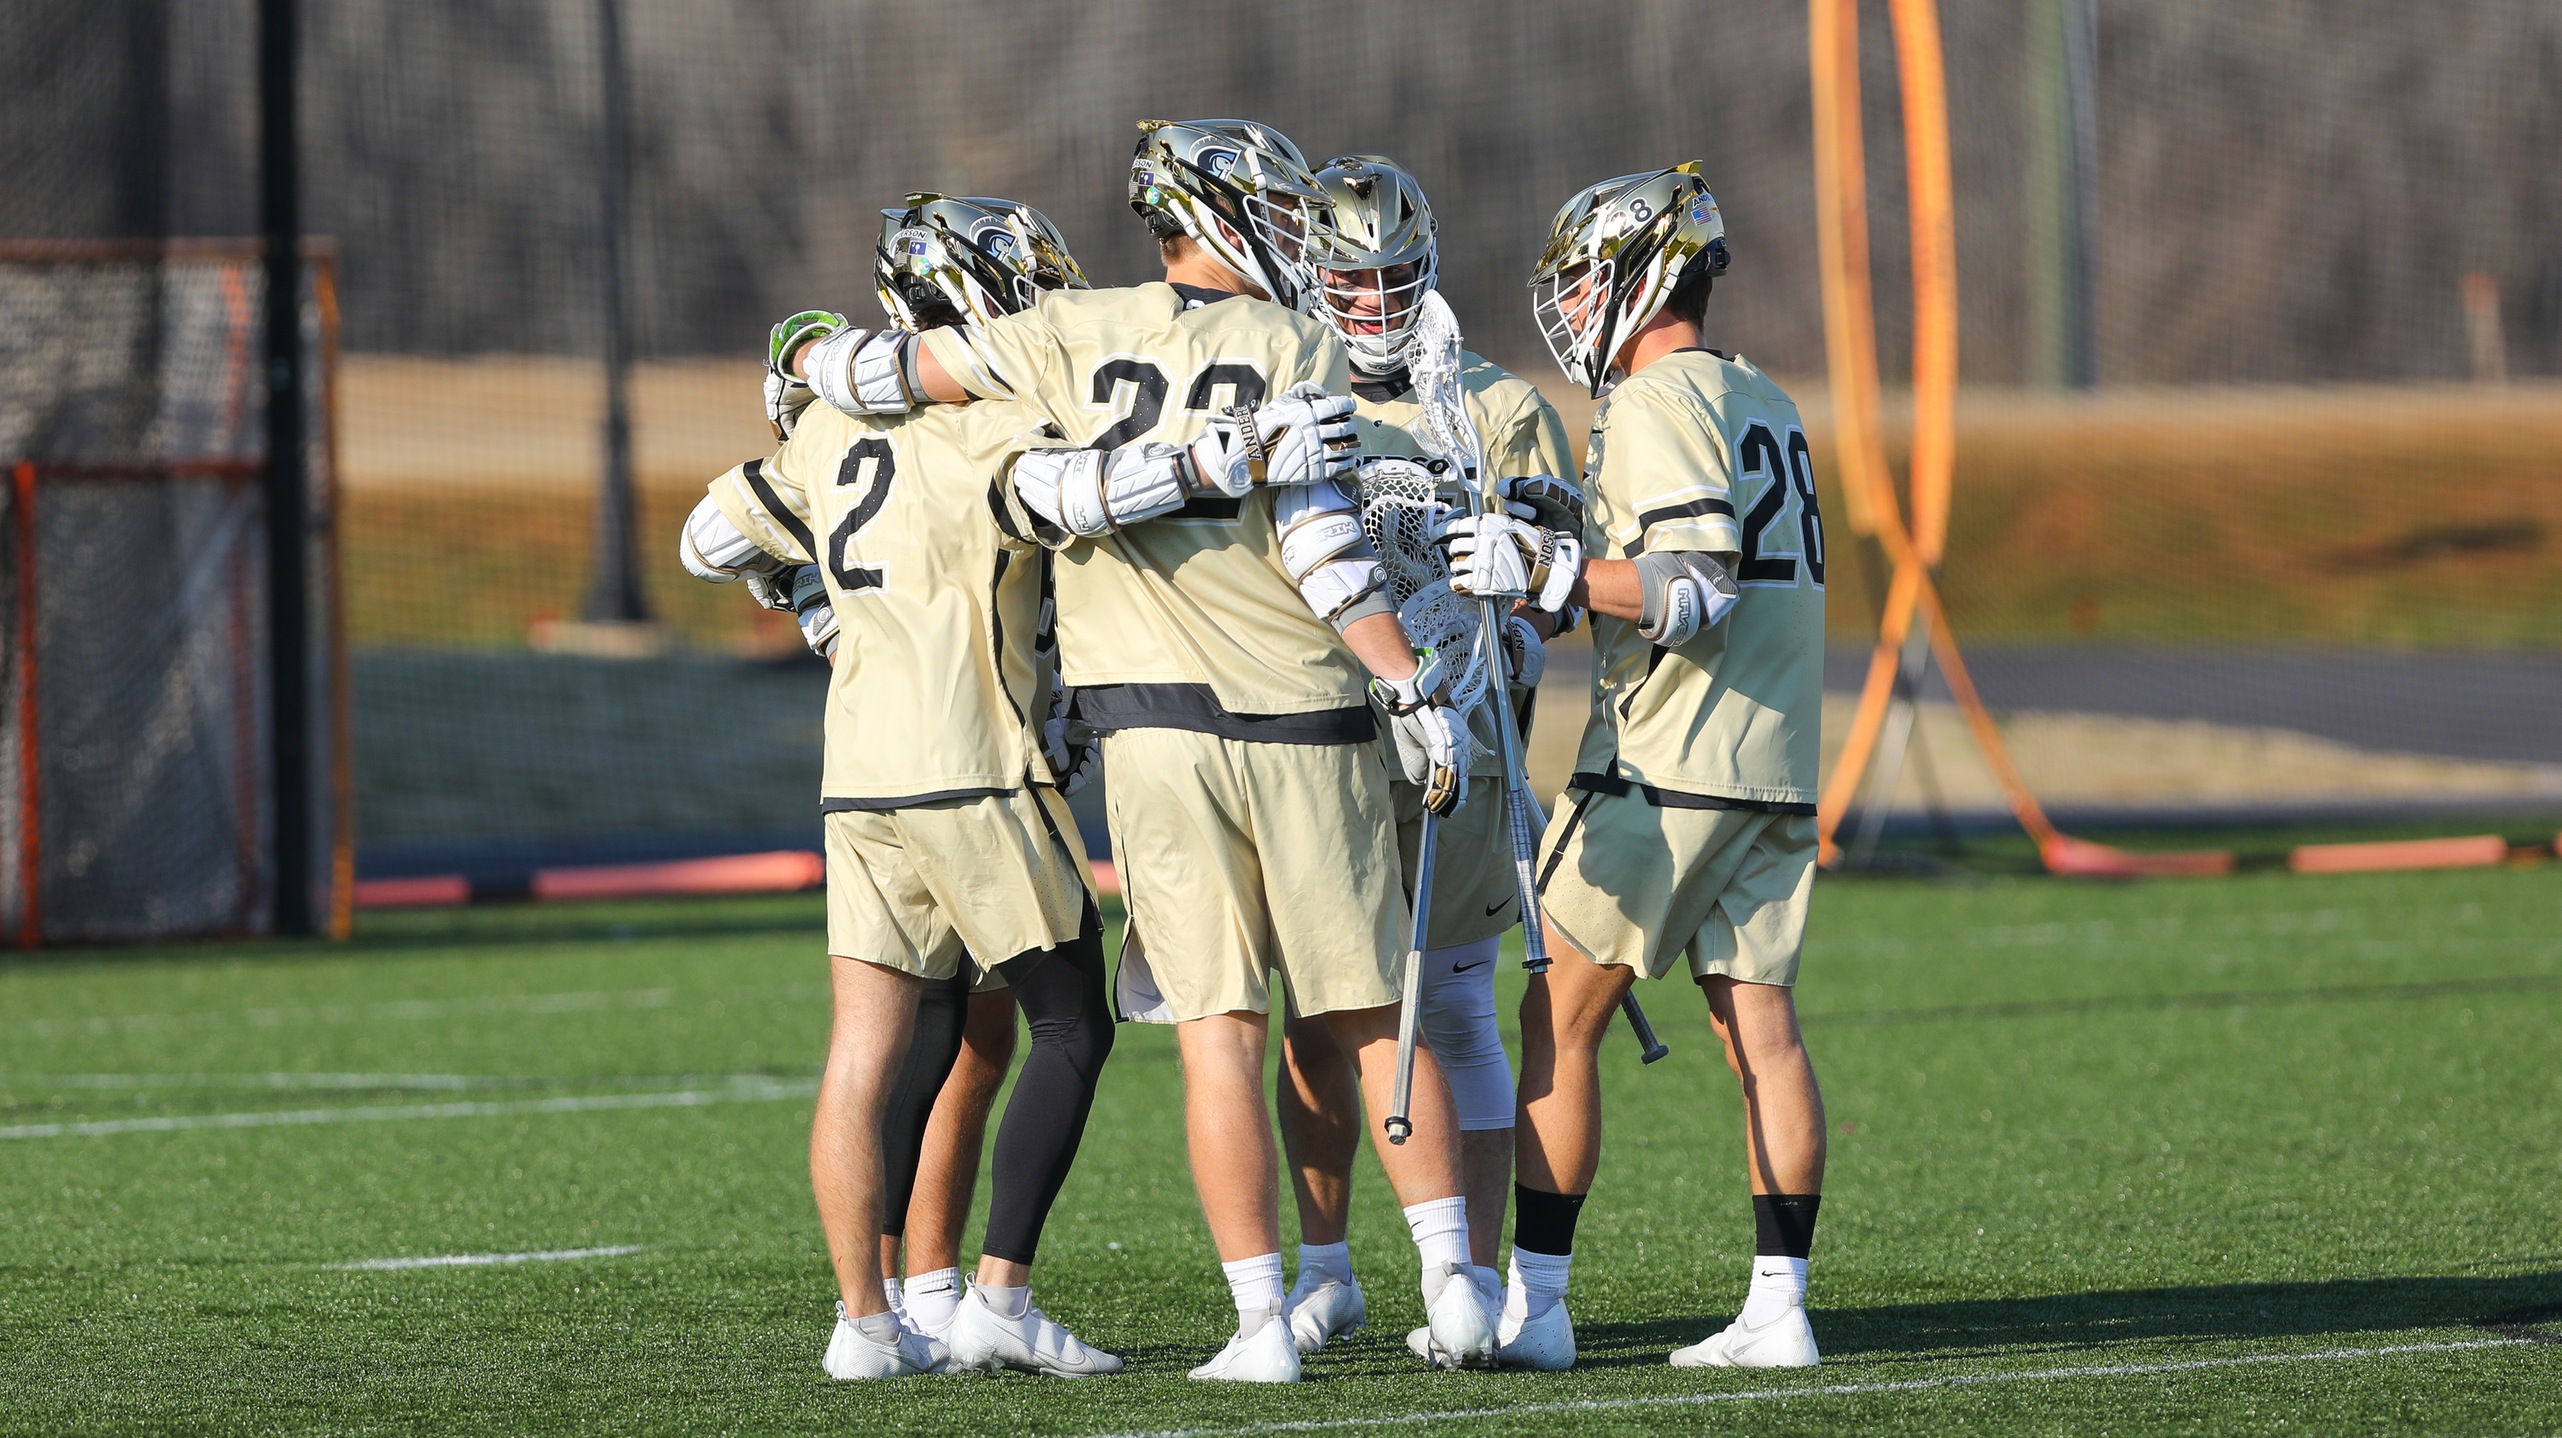 Trojans Win Fourth Straight With 22-5 Victory Over Lees-McRae